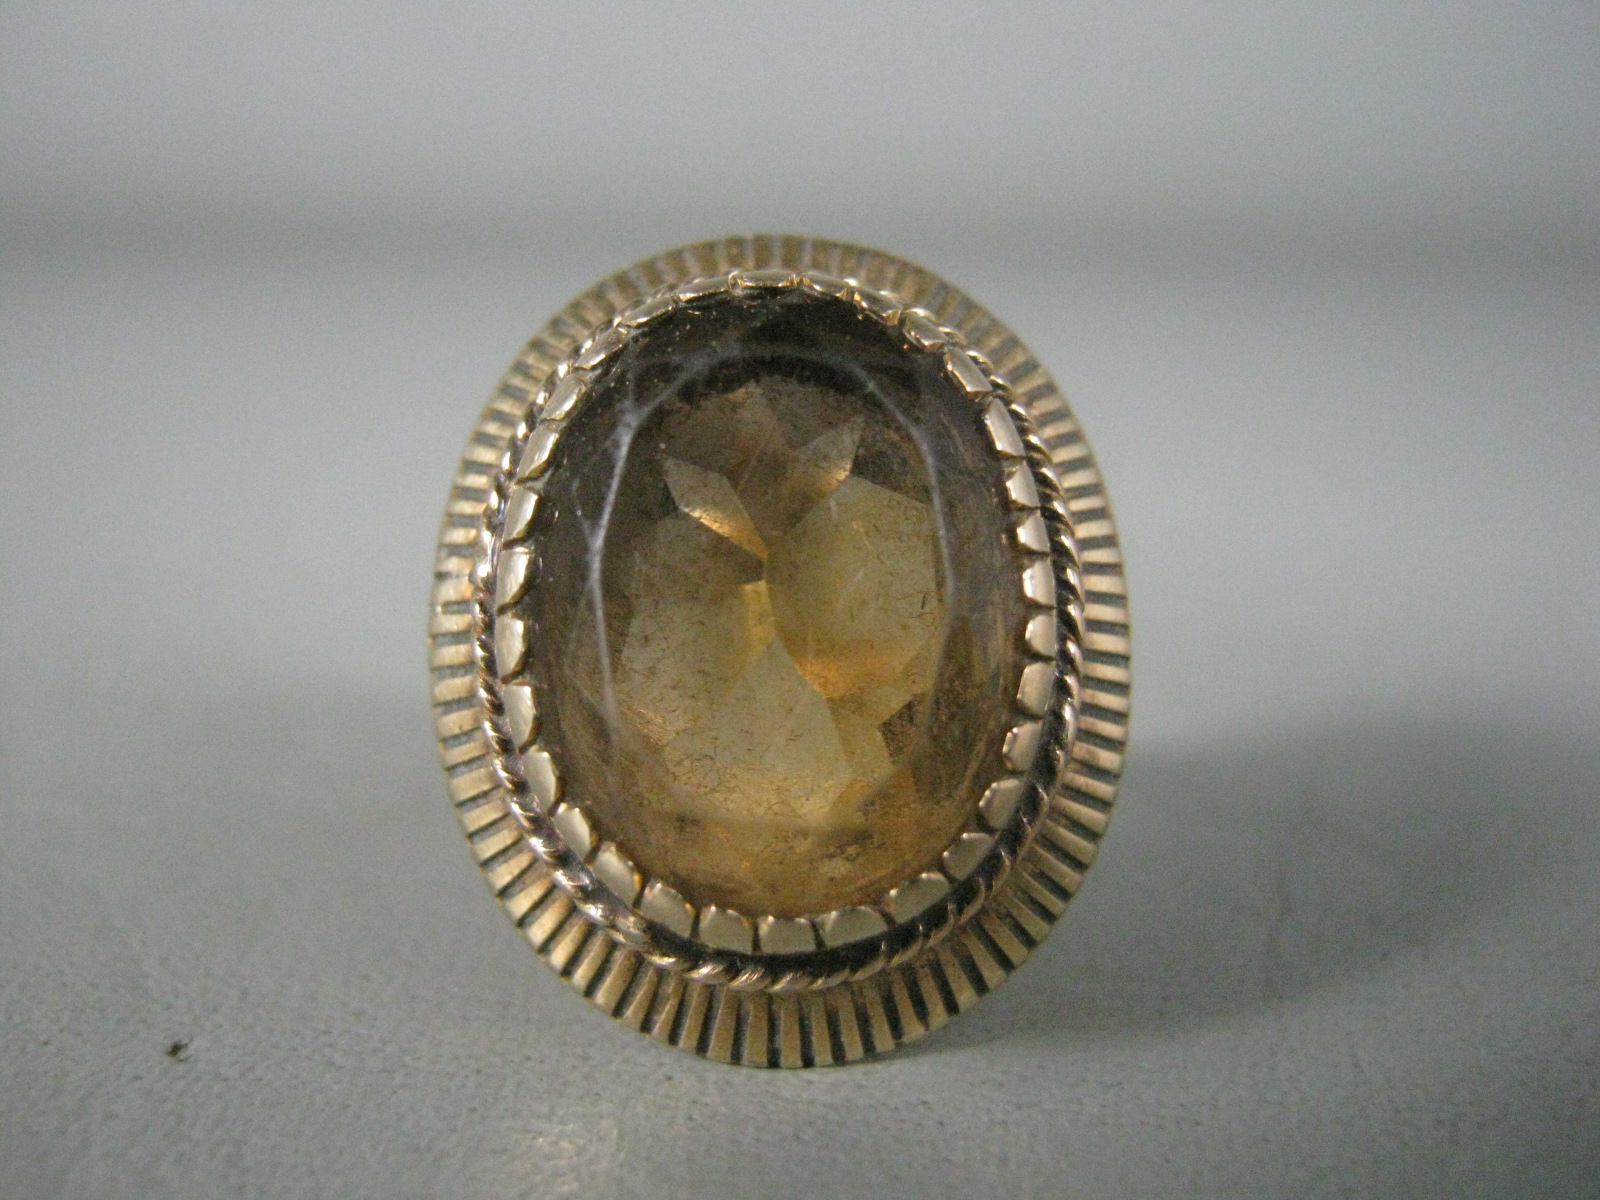 Vintage Antique 14K Yellow Gold Ring w/Oval Topaz Gemstone 10.2 Grams Size 8 NR! 3